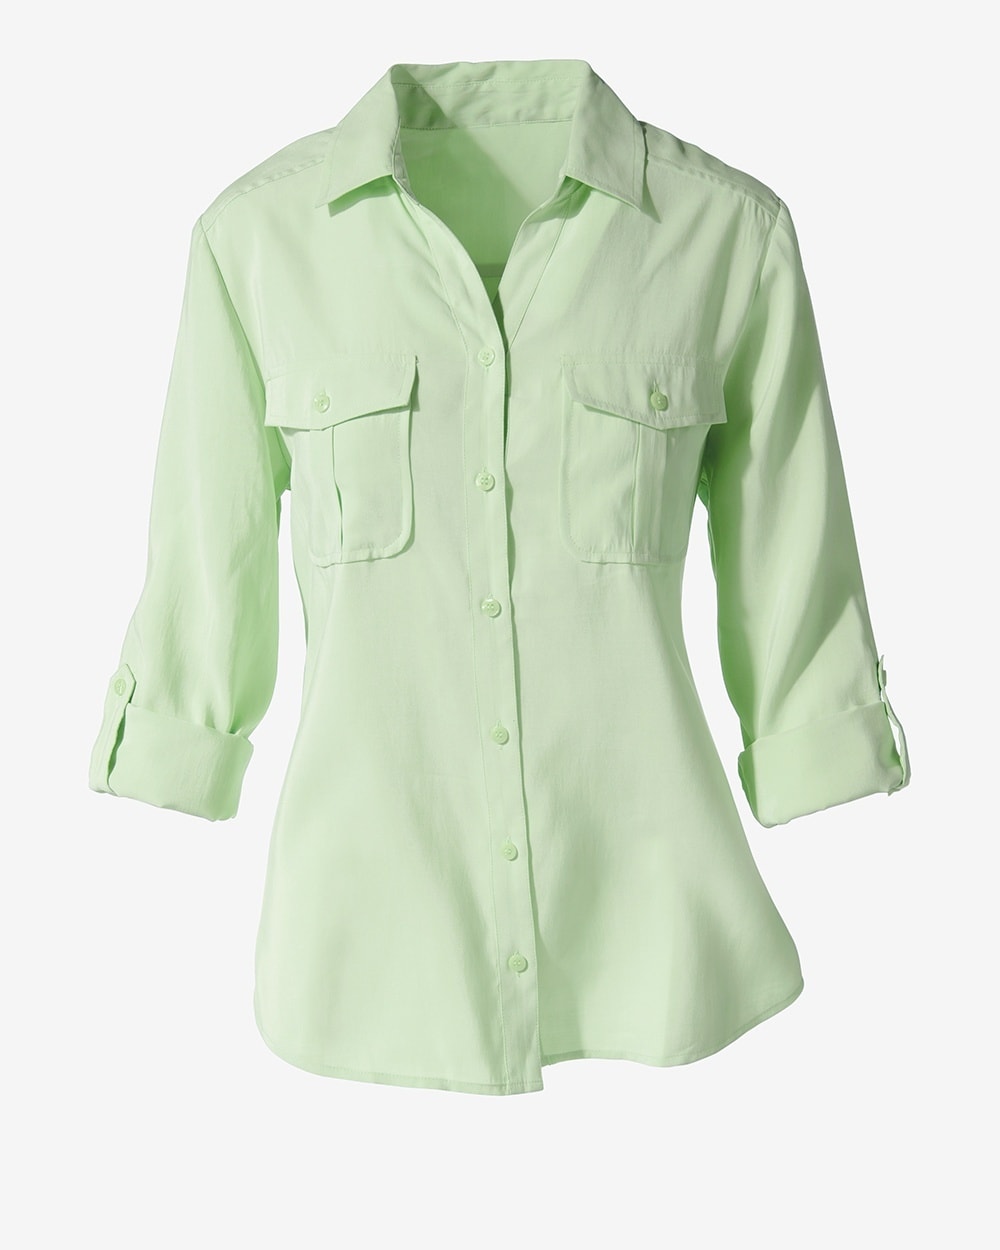 The Silky Chic Shirt